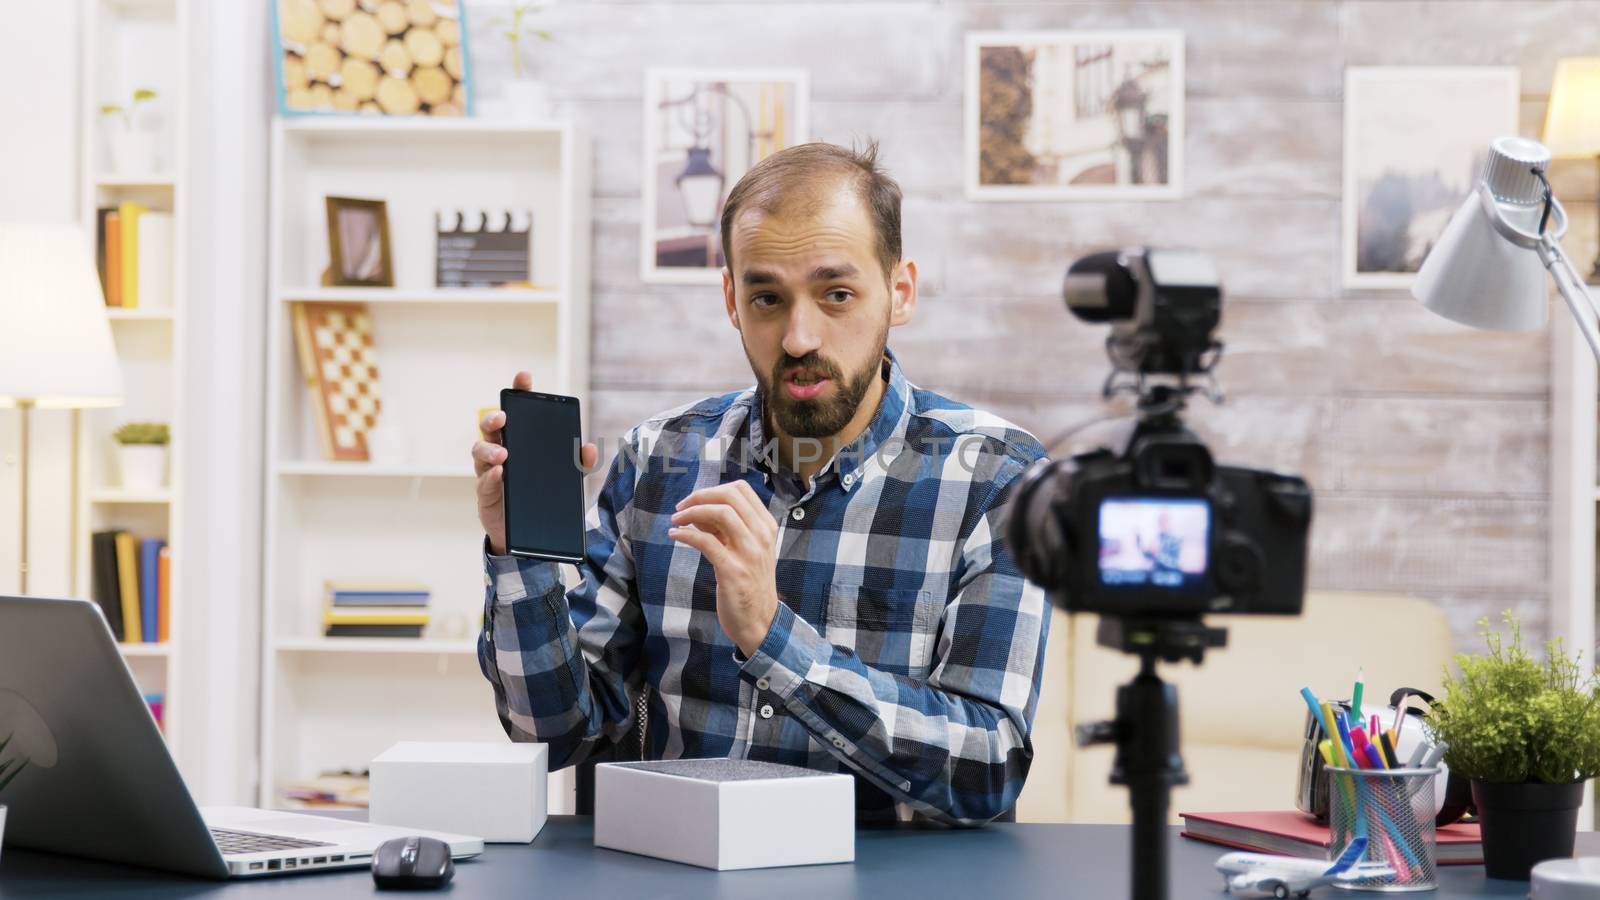 Famous young influencer recording the unboxing of a phone by DCStudio